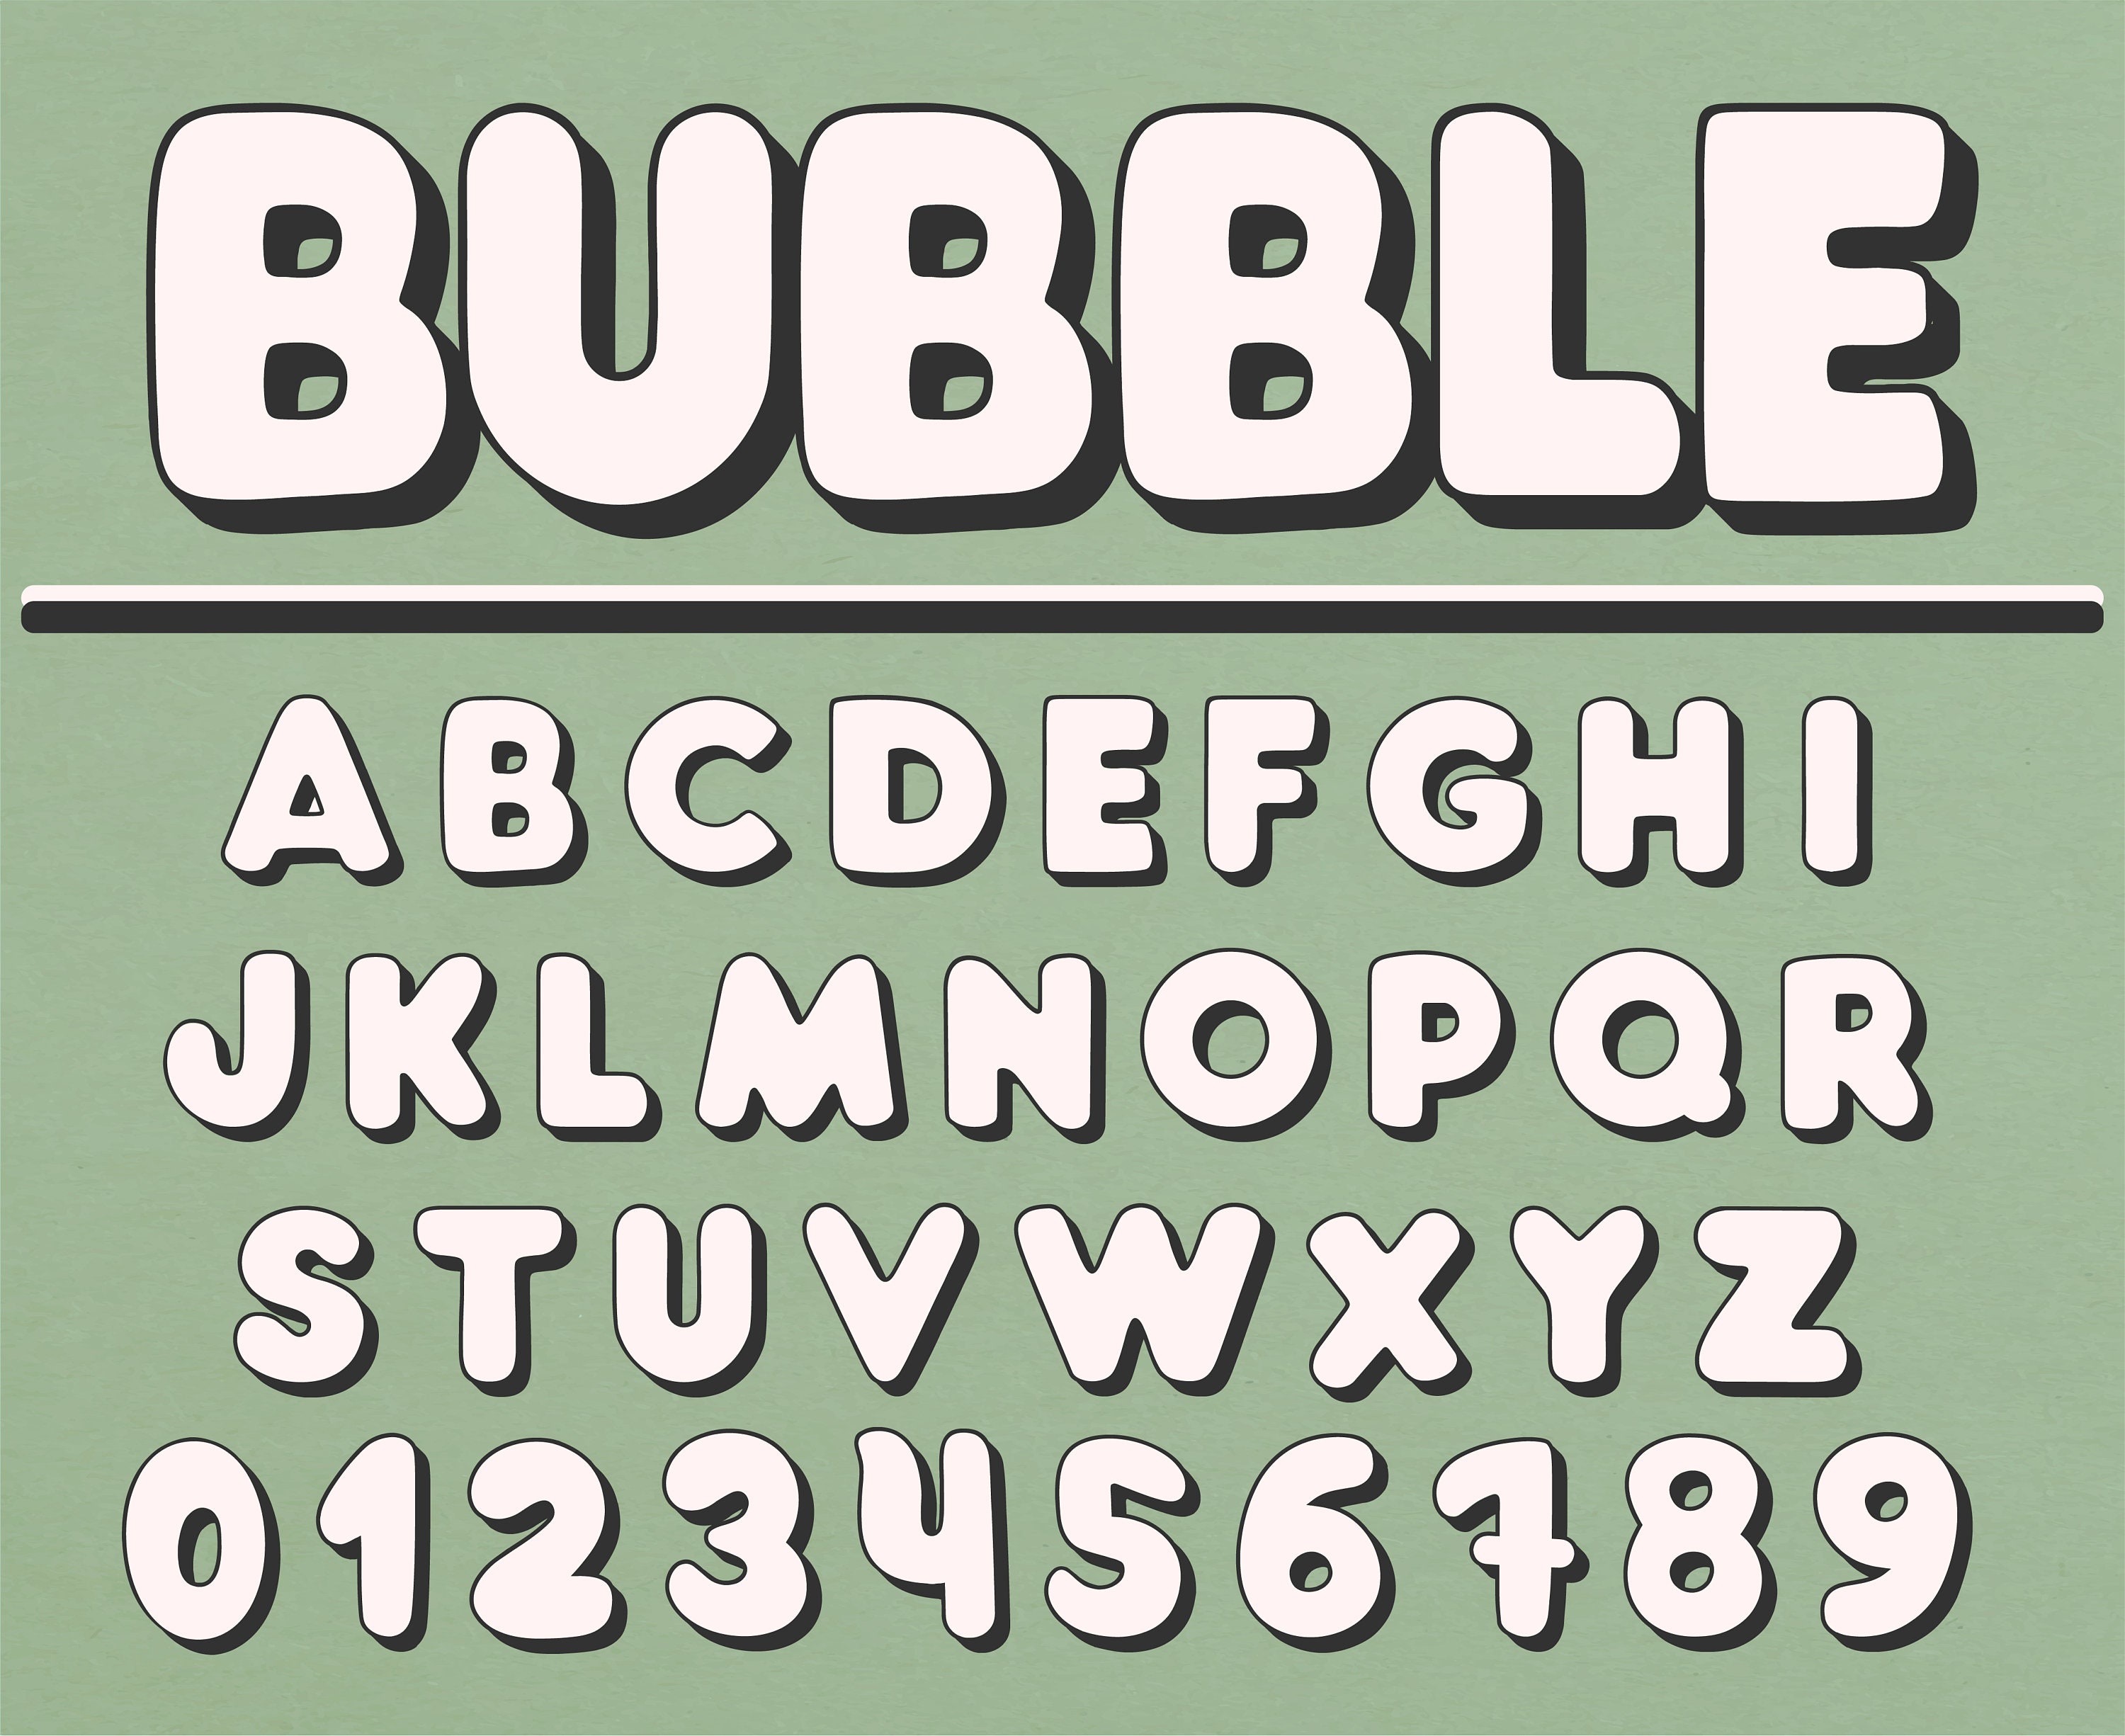 Why Bubble Handwriting?